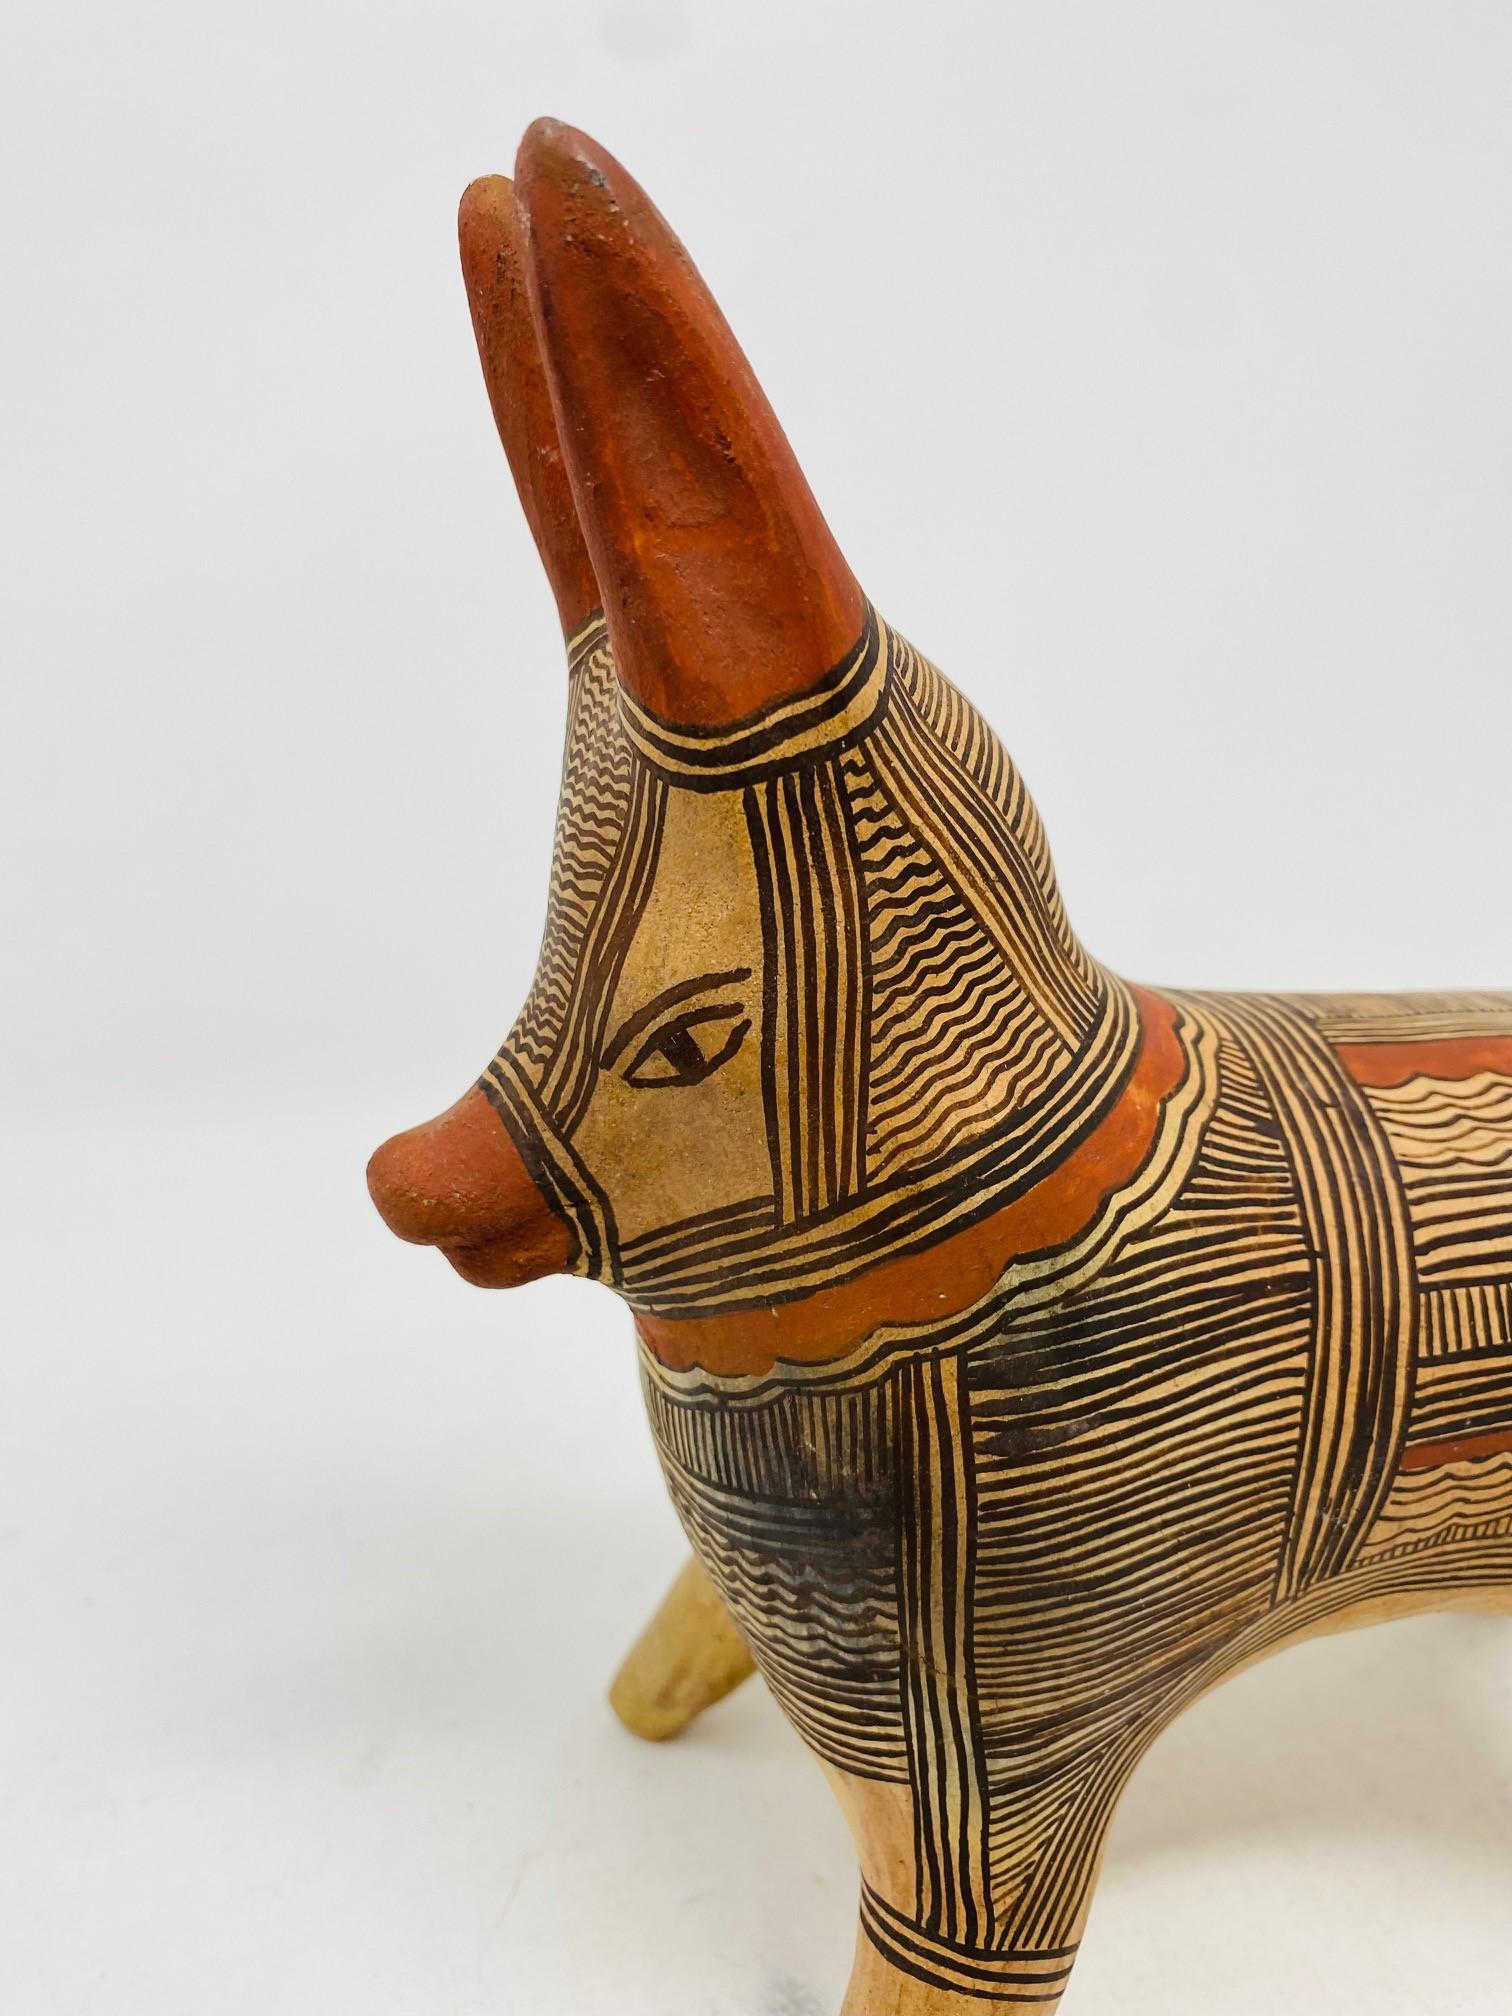 Hand-Crafted Vintage 1960s Mexican Folk Art Pottery Donkey Sculpture For Sale